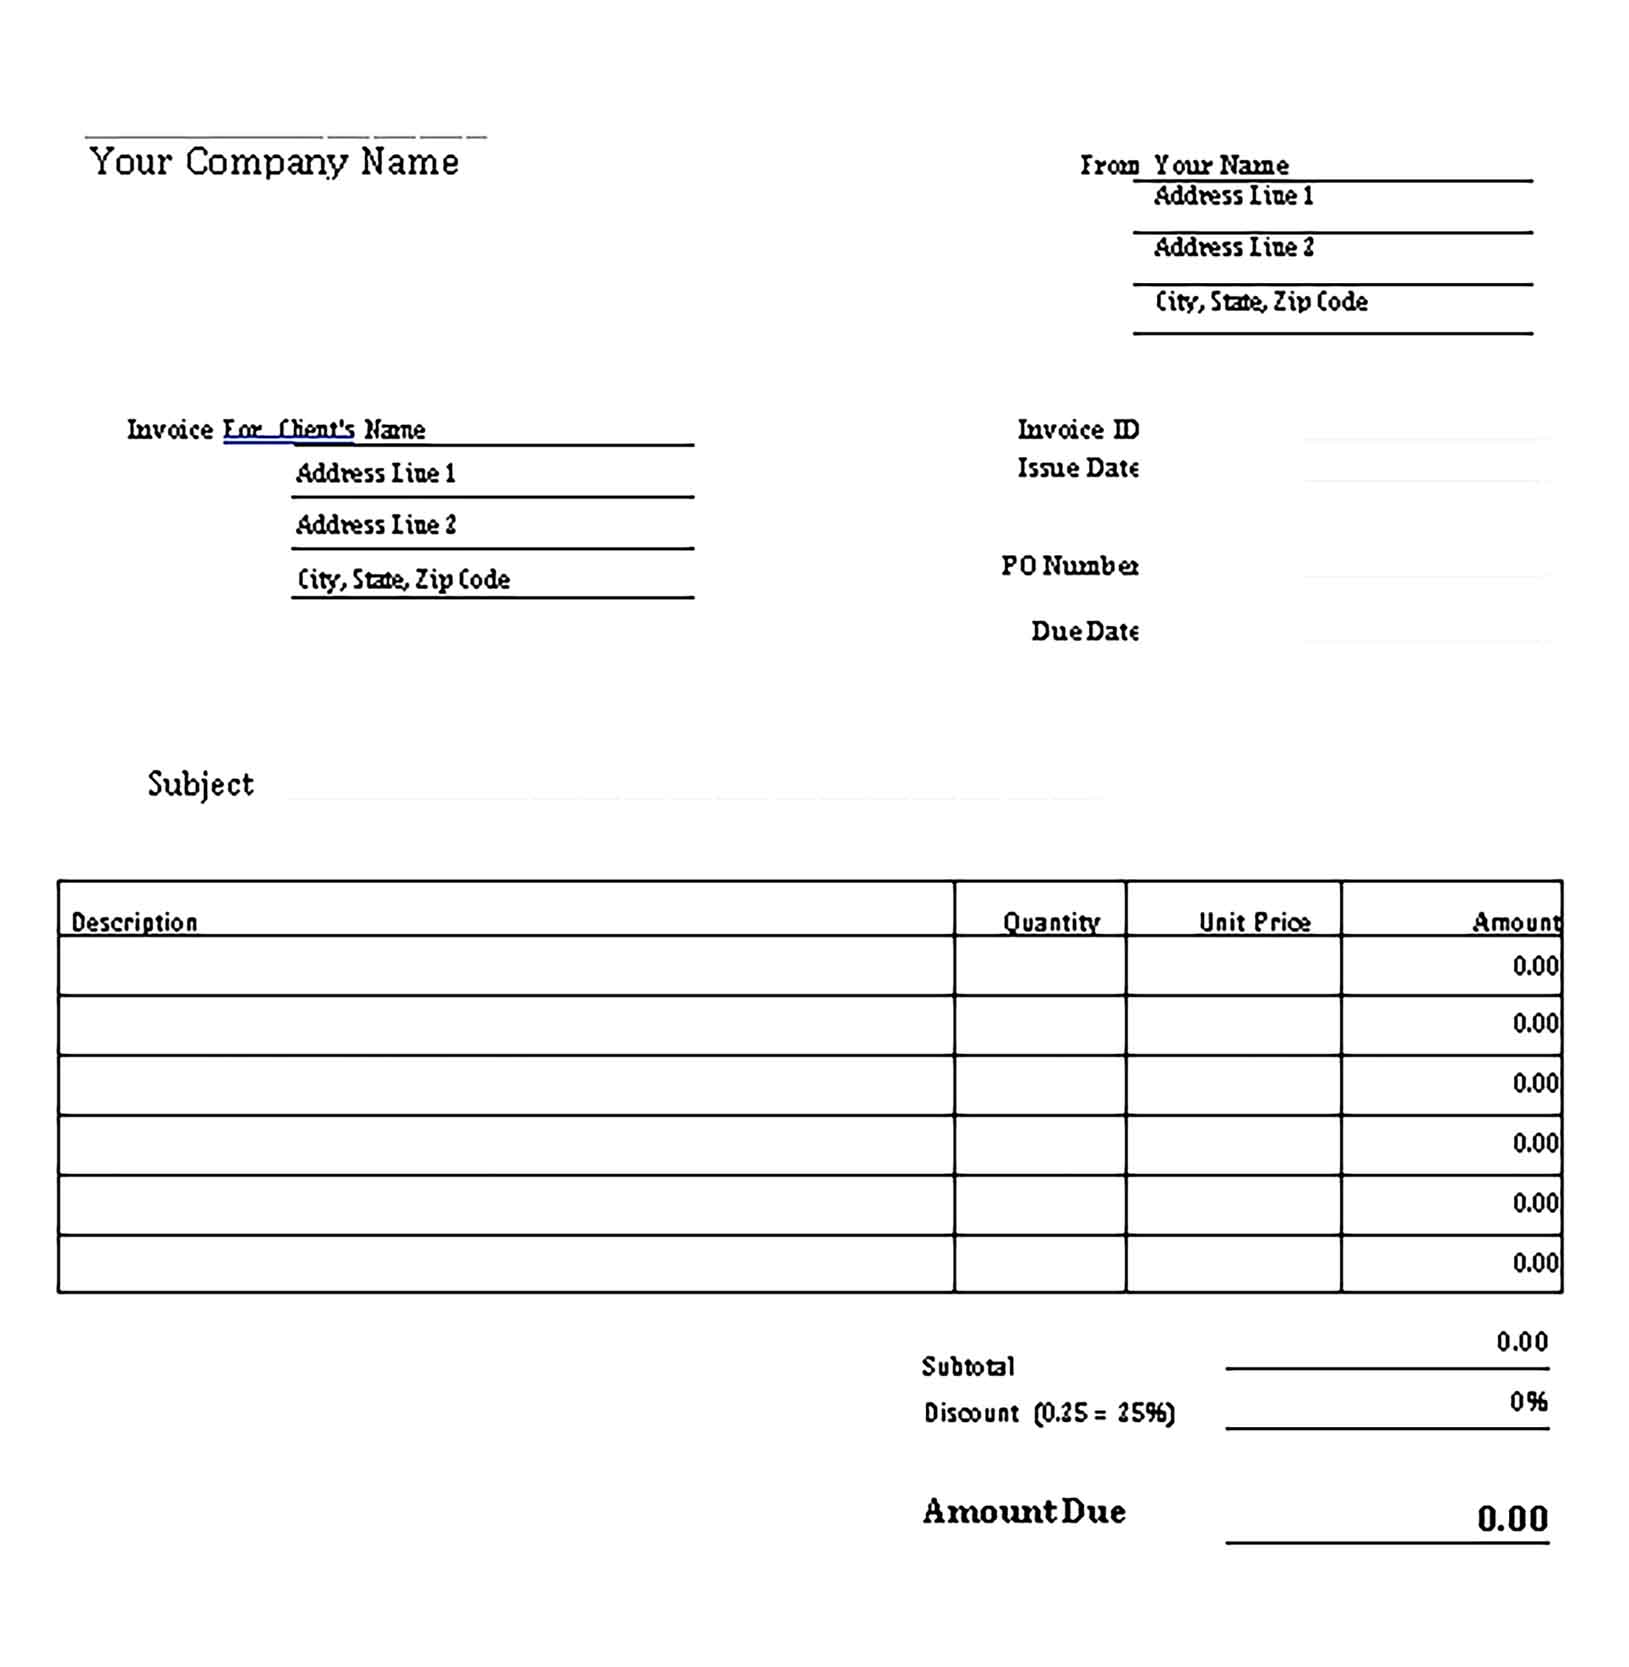 Sample Templates Home Bakery Invoice 1 1